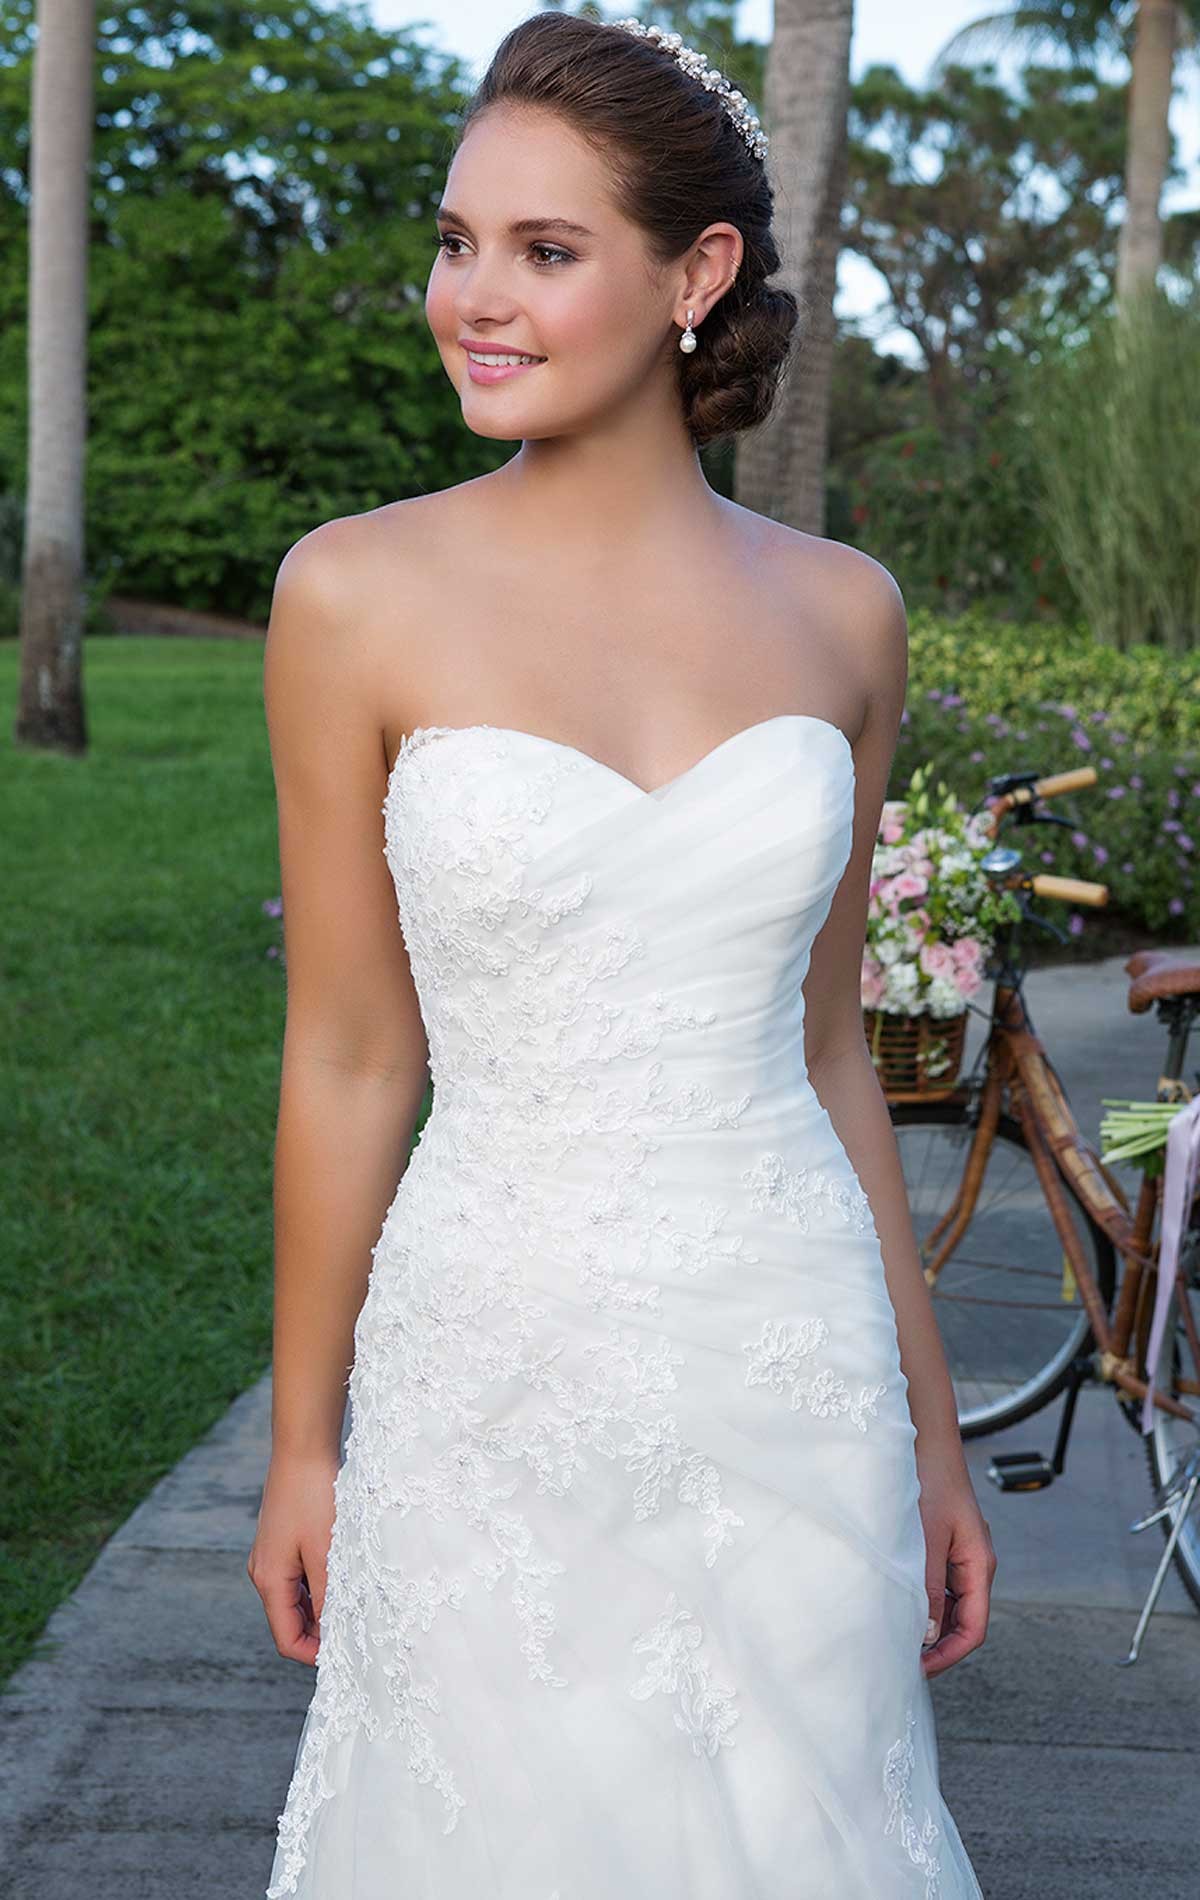 6120 - Size 18 - Sweetheart by Sincerity Bridal 6120, Lightweight Lace & Tulle Slim A-Line Wedding Dress with Strapless Sweetheart Neckline at Blessings Bridal Boutique, Brighton, East Sussex, BN1 5GG. Telephone: 01273 505766